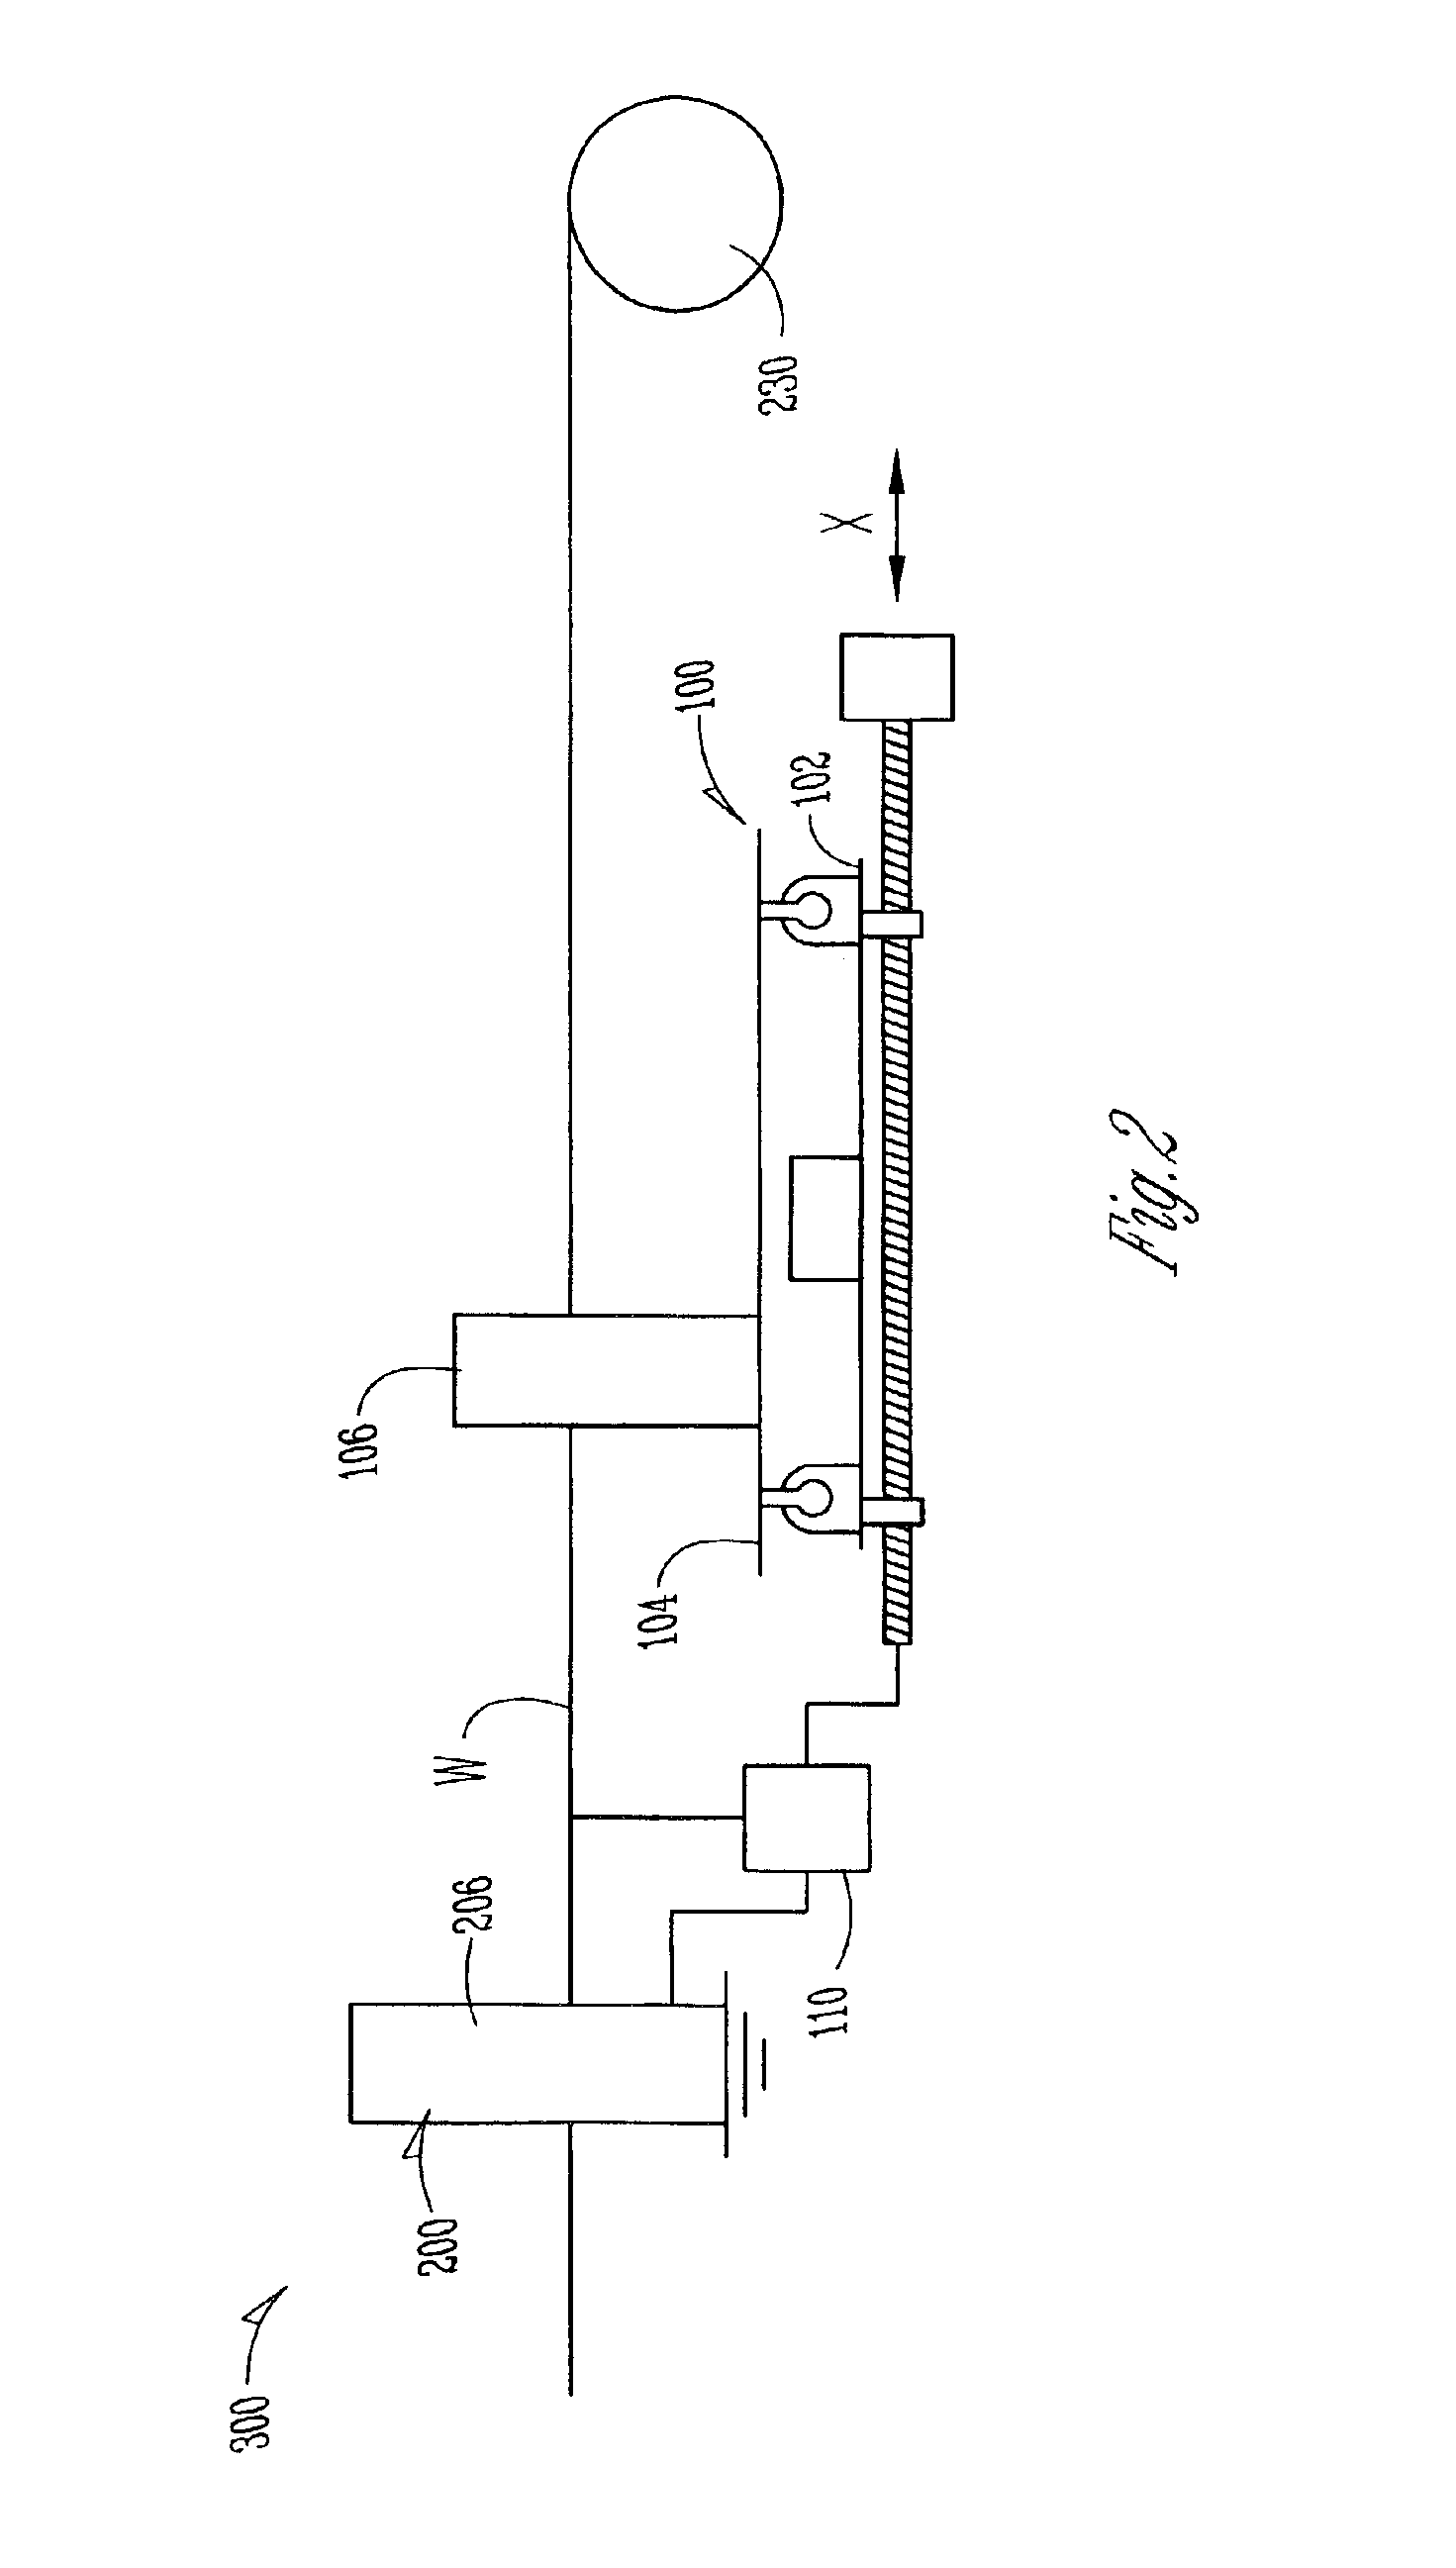 Apparatus, seaming assembly and method for placing seams in a continuously moving web